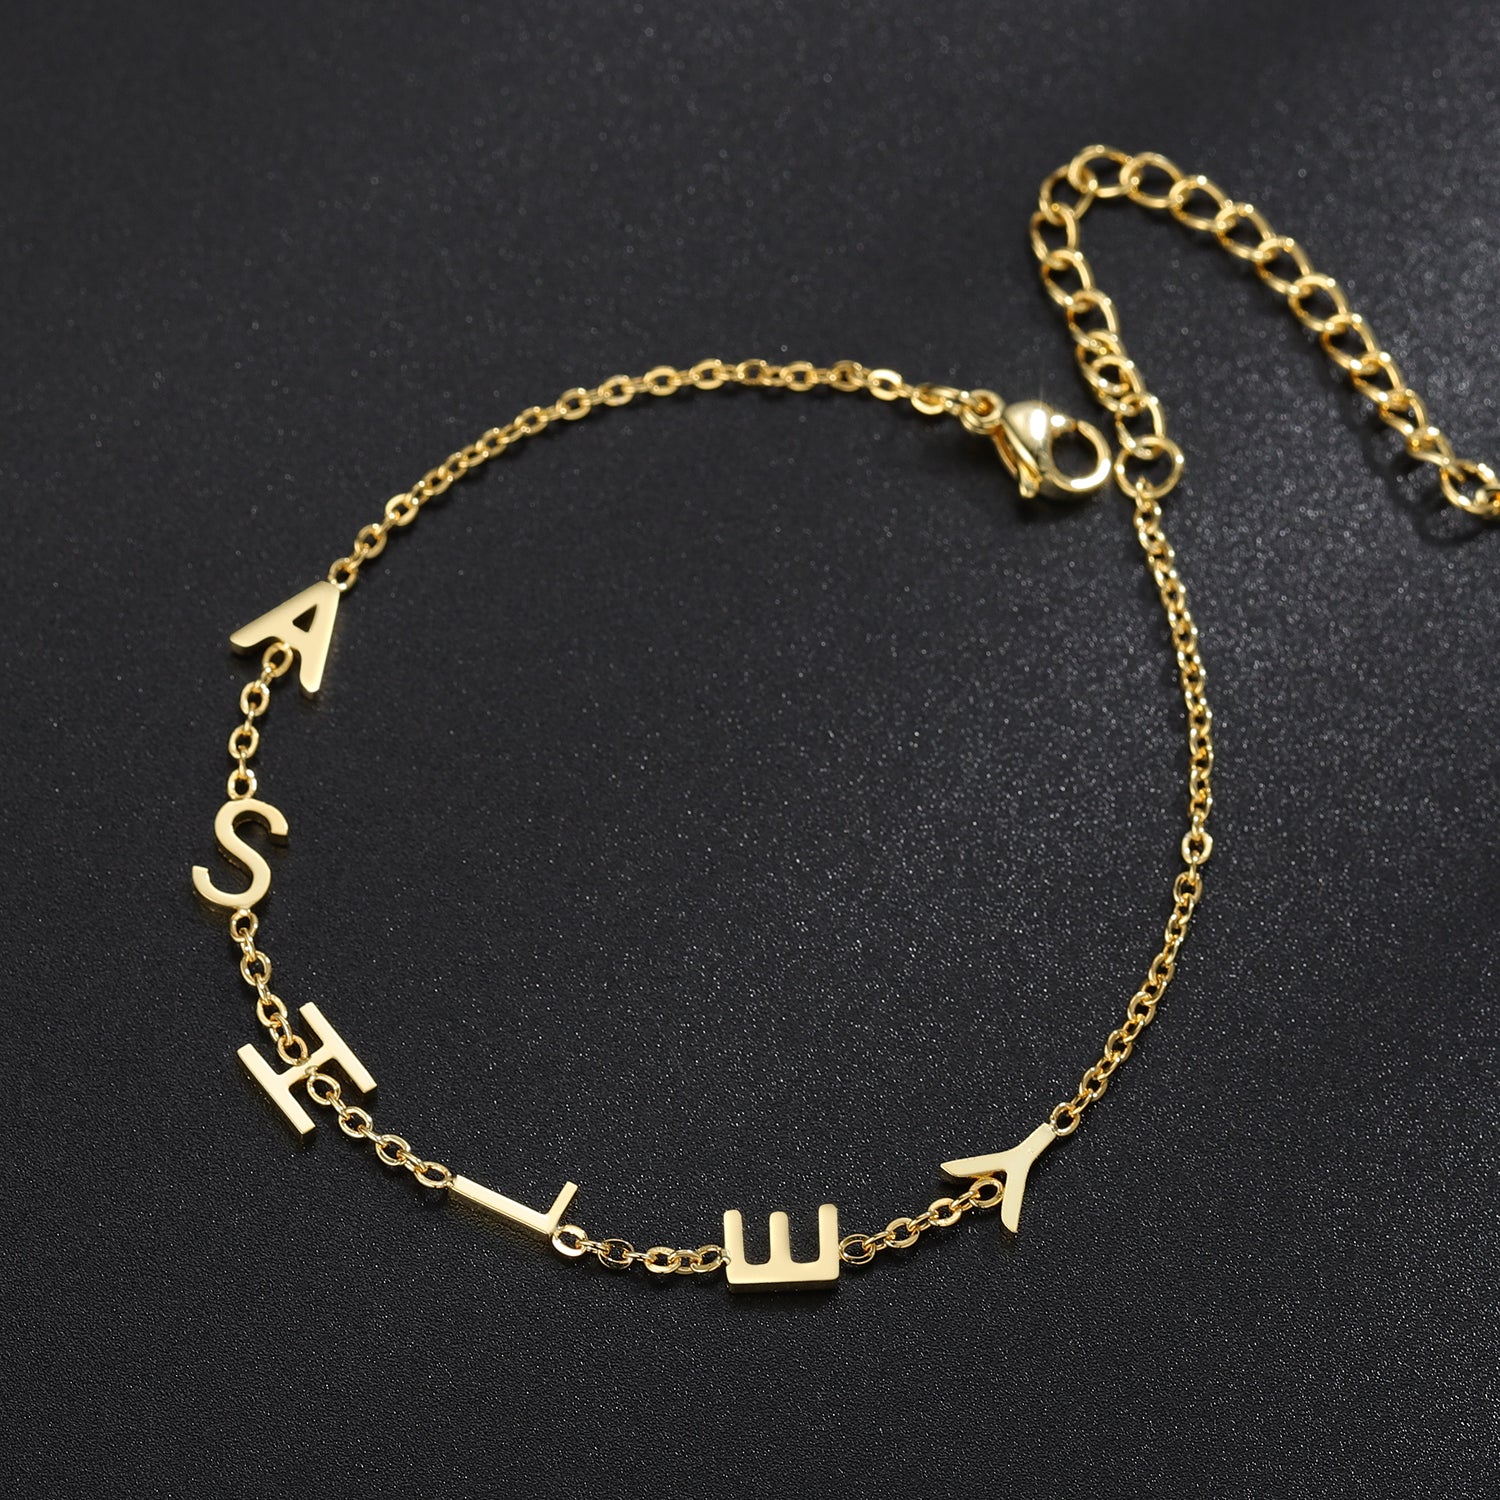 Personalized Initial Nameplate Anklet Bracelet